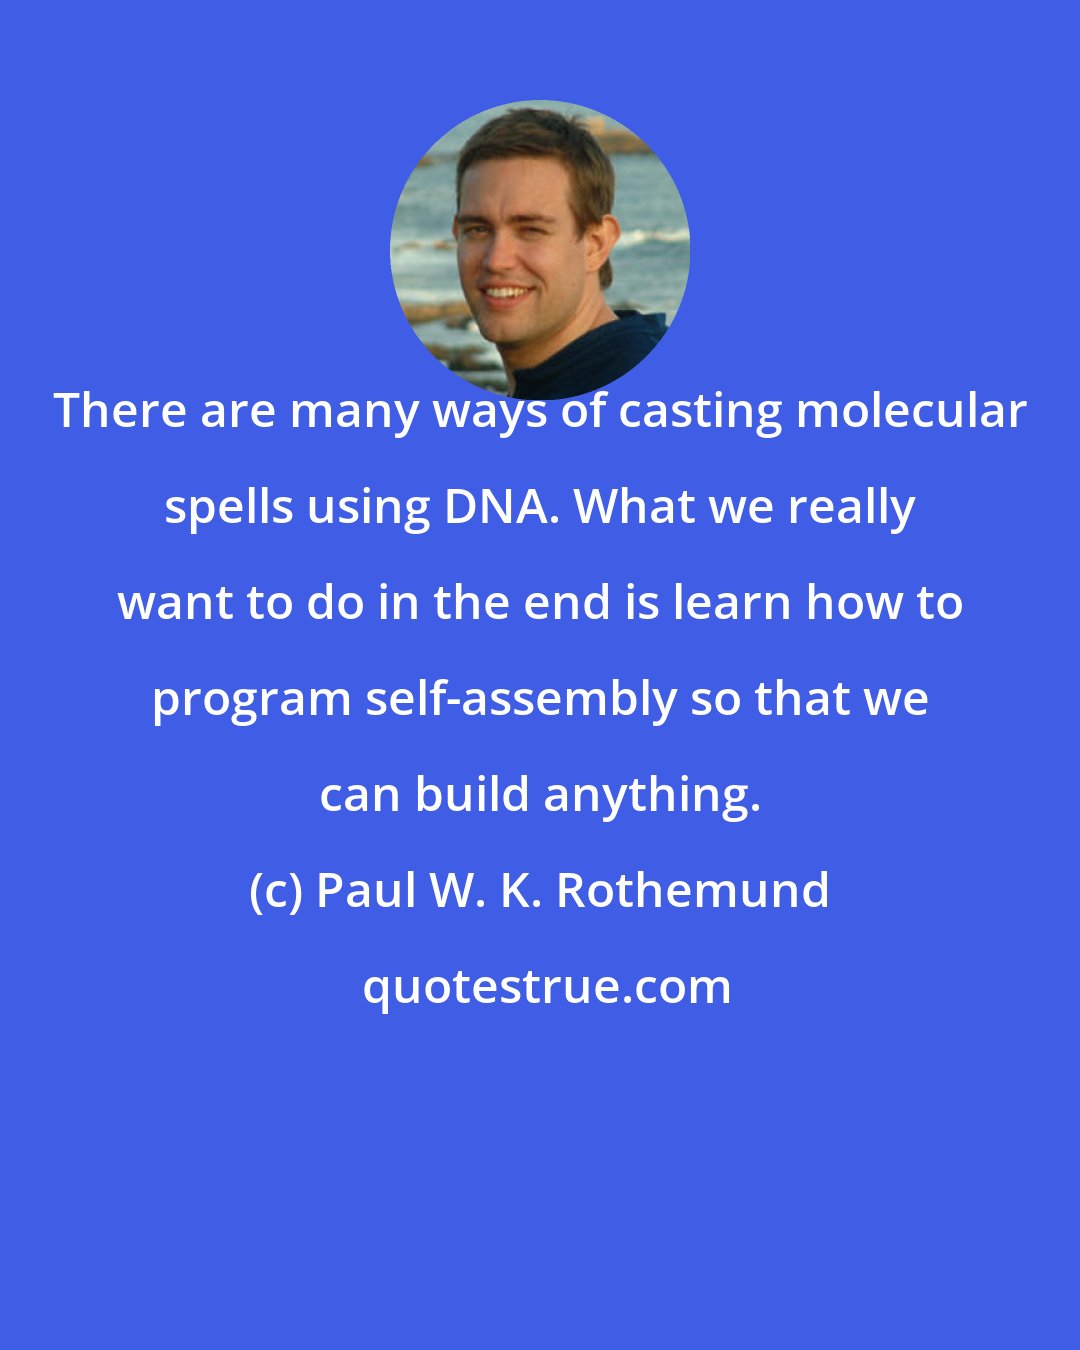 Paul W. K. Rothemund: There are many ways of casting molecular spells using DNA. What we really want to do in the end is learn how to program self-assembly so that we can build anything.